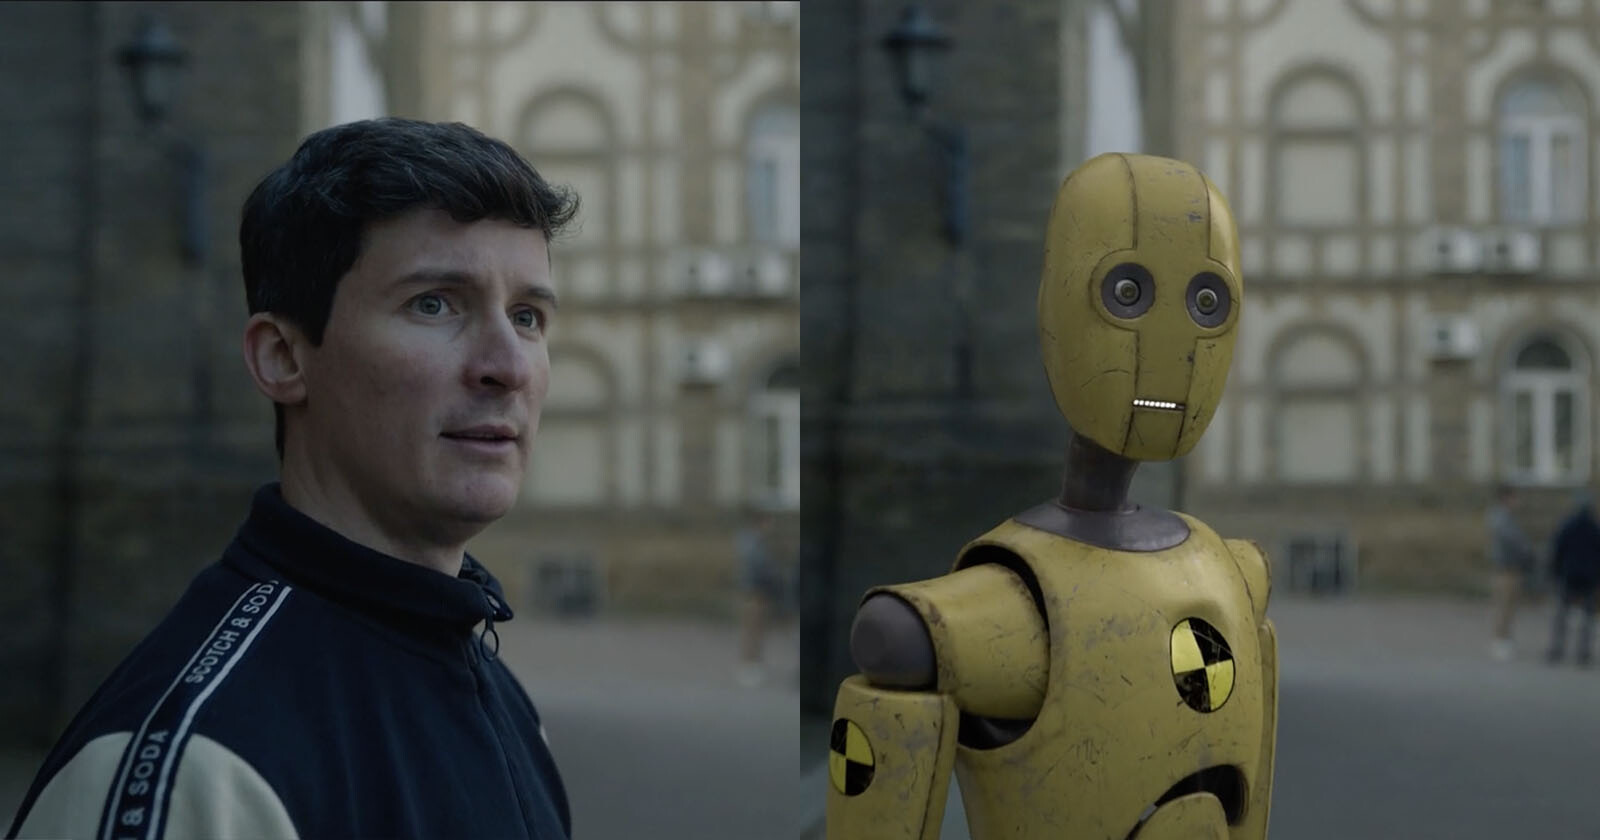 Wonder Studio is a Mind-Blowing Web App for Replacing Actors with CGI